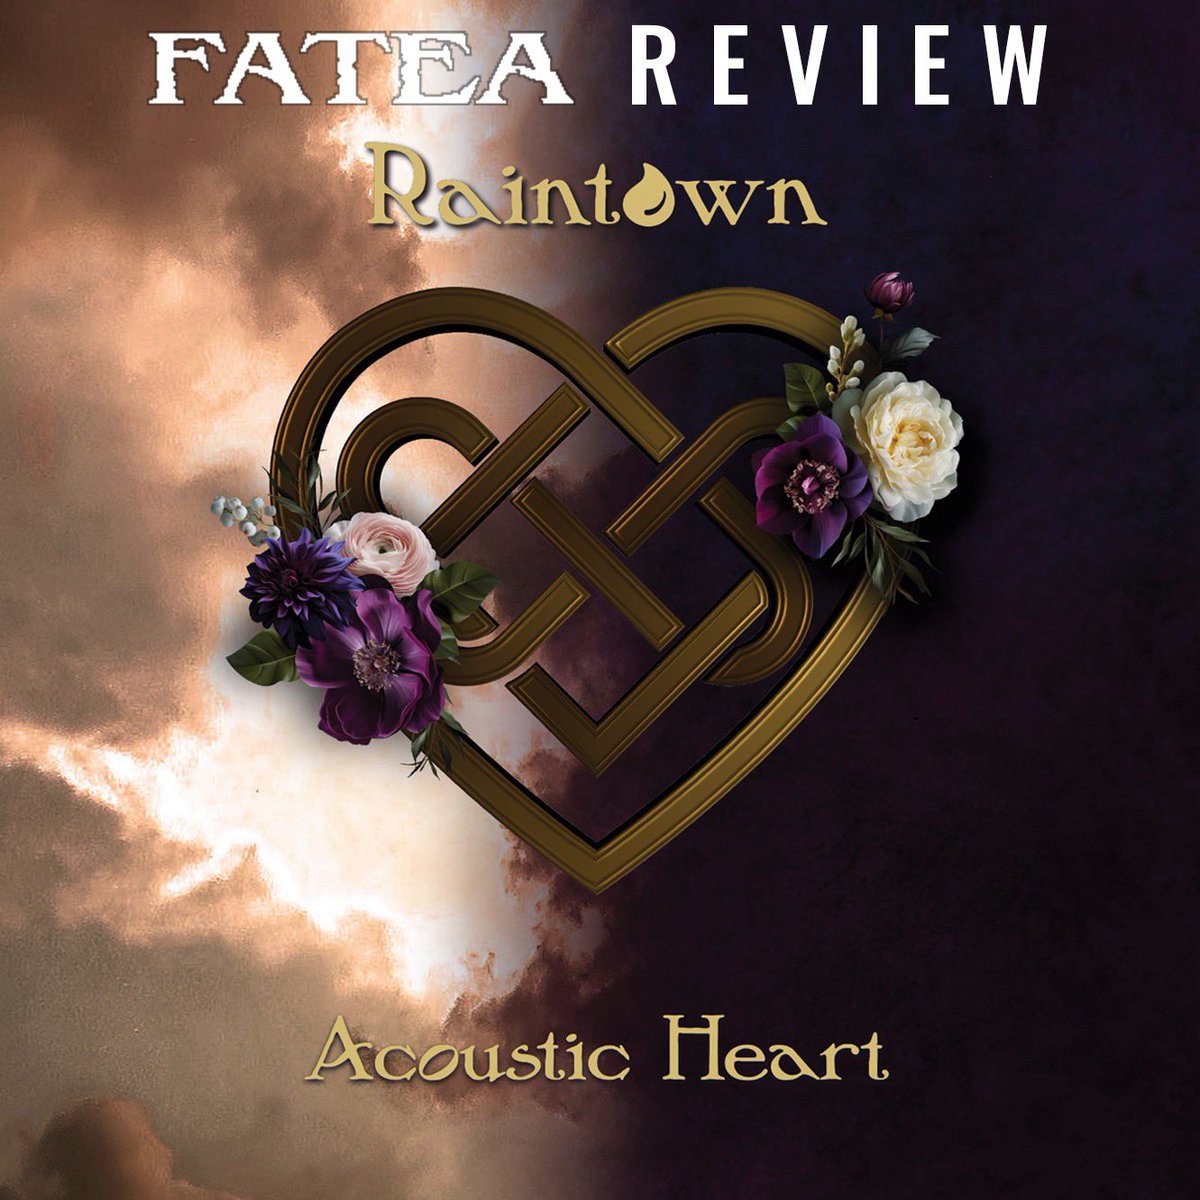 Thank you to @fateamag for the review of 'Acoustic Heart.' Review: fatea-records.co.uk/magazine/revie… 📀If you want to have a listen or grab a CD or one of the bundles check out acousticheart.net #newmusicalert #newmusicrelease #ukcountrymusic #ukcountry